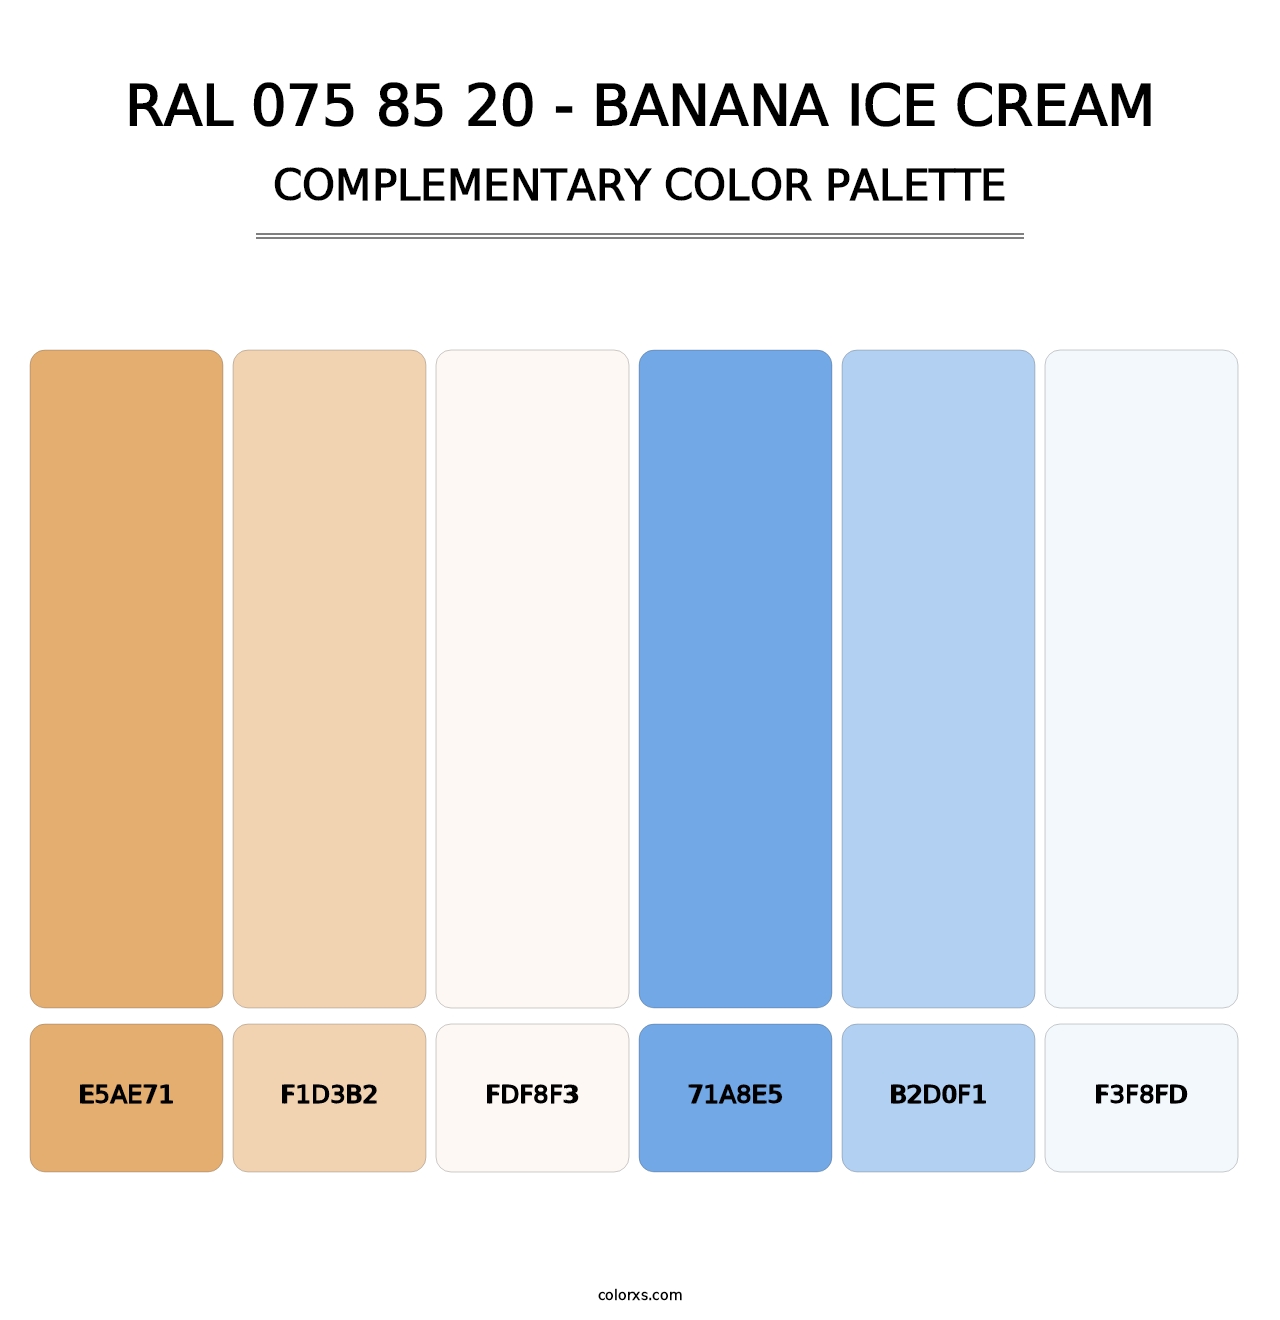 RAL 075 85 20 - Banana Ice Cream - Complementary Color Palette